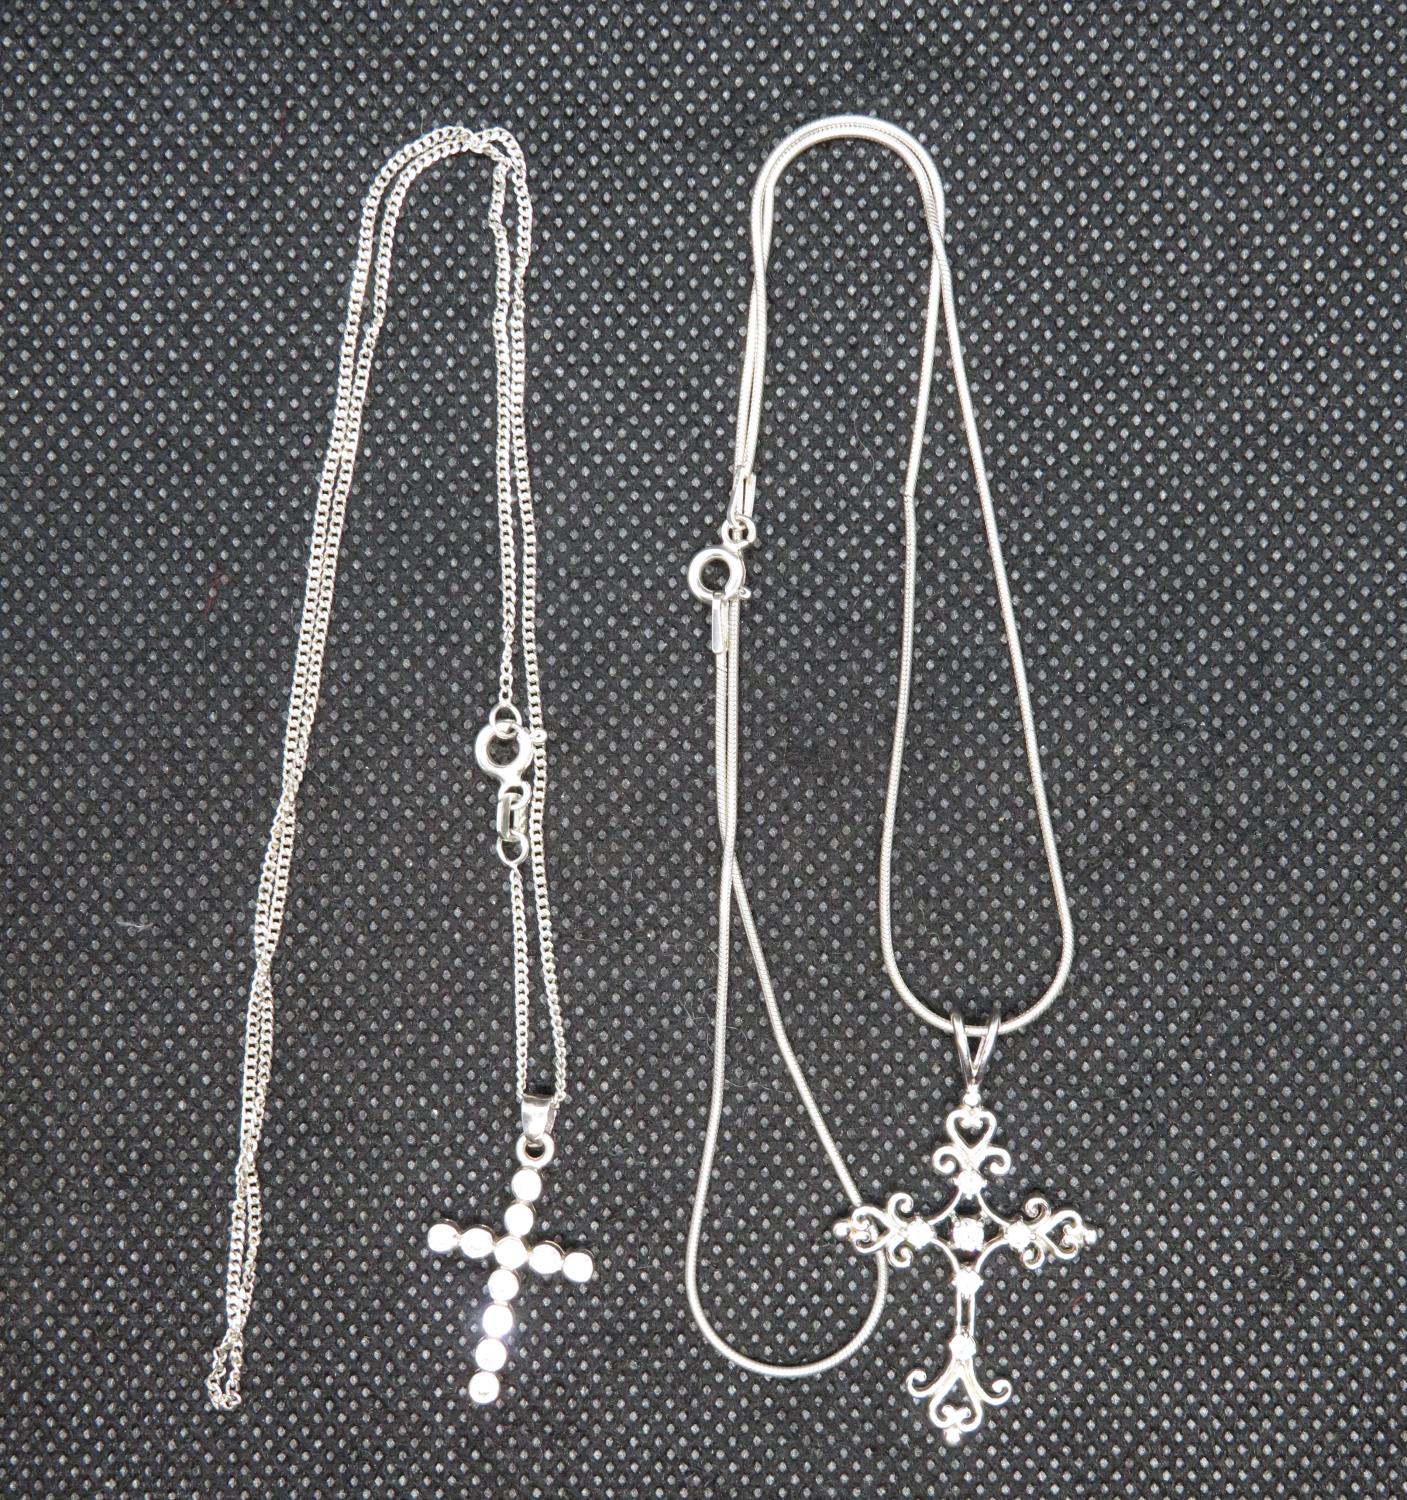 2 silver stone set crosses on 16" chains 7.5g - Image 3 of 3